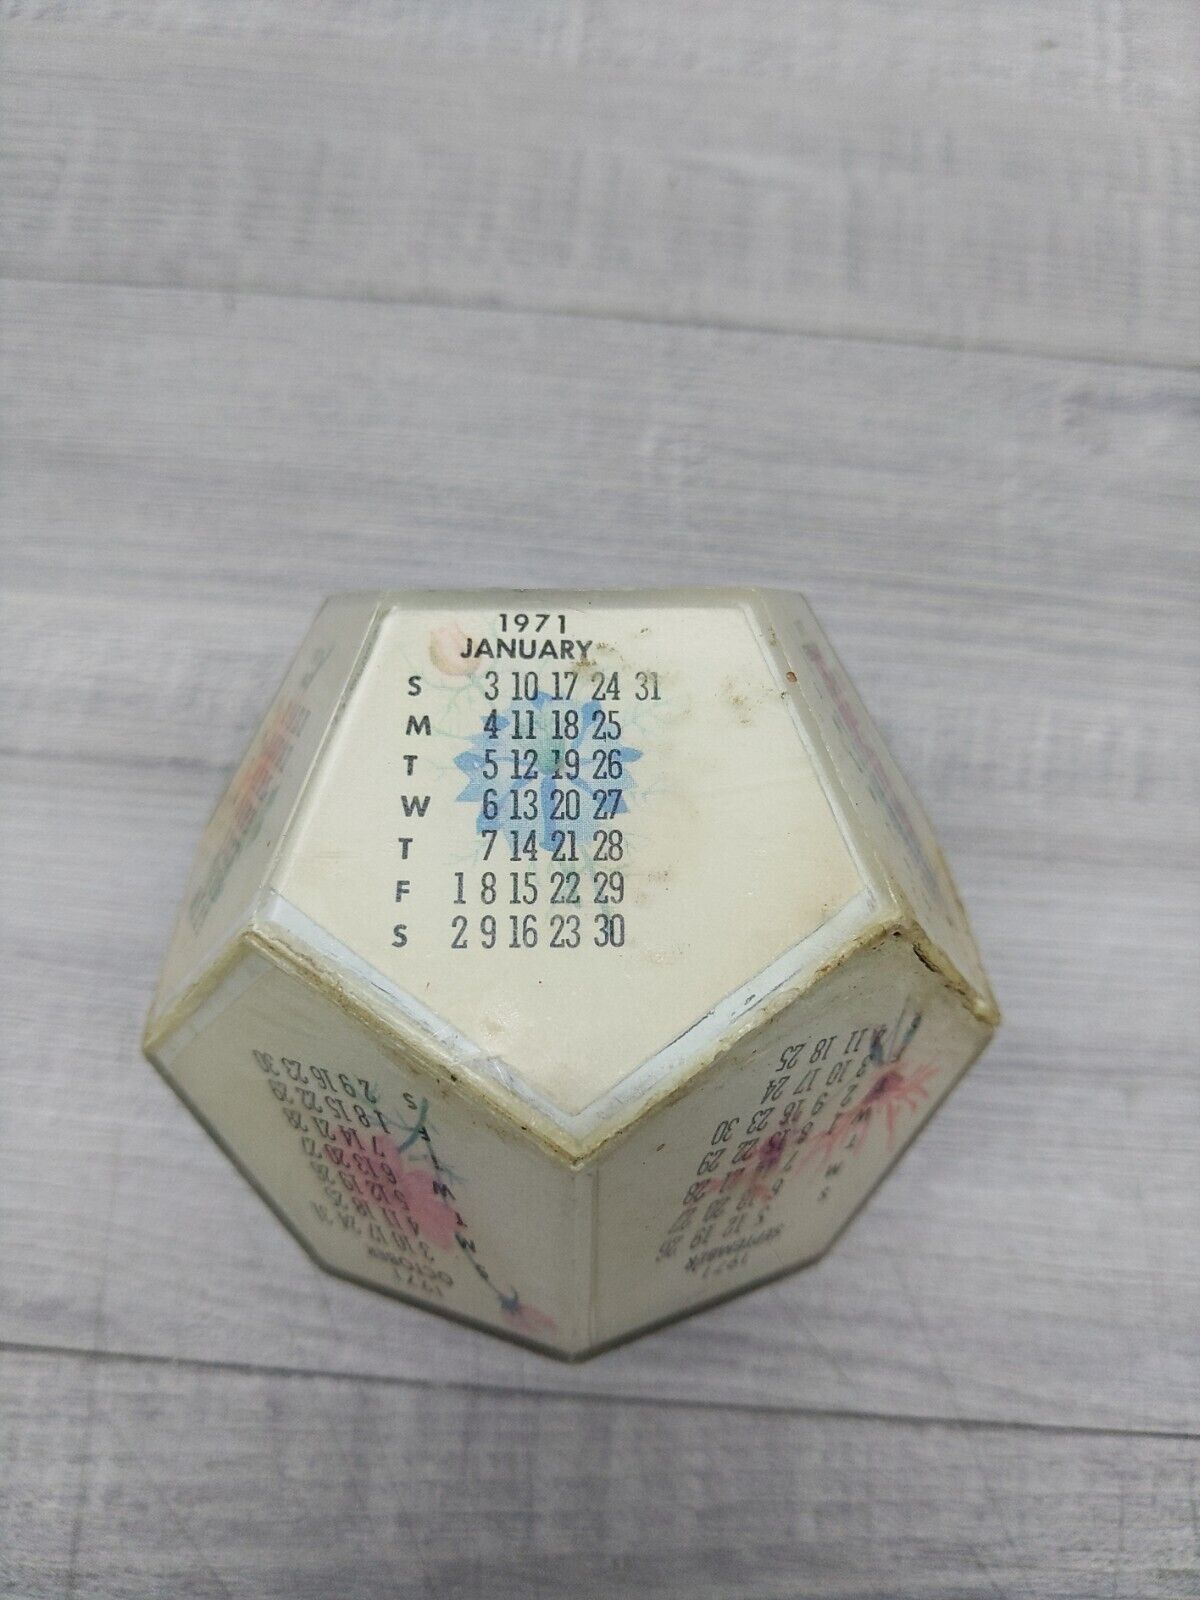 Vintage 1971 DODECAHEDRON (12 SIDED) Desk Calendar / Paperweight Rattle